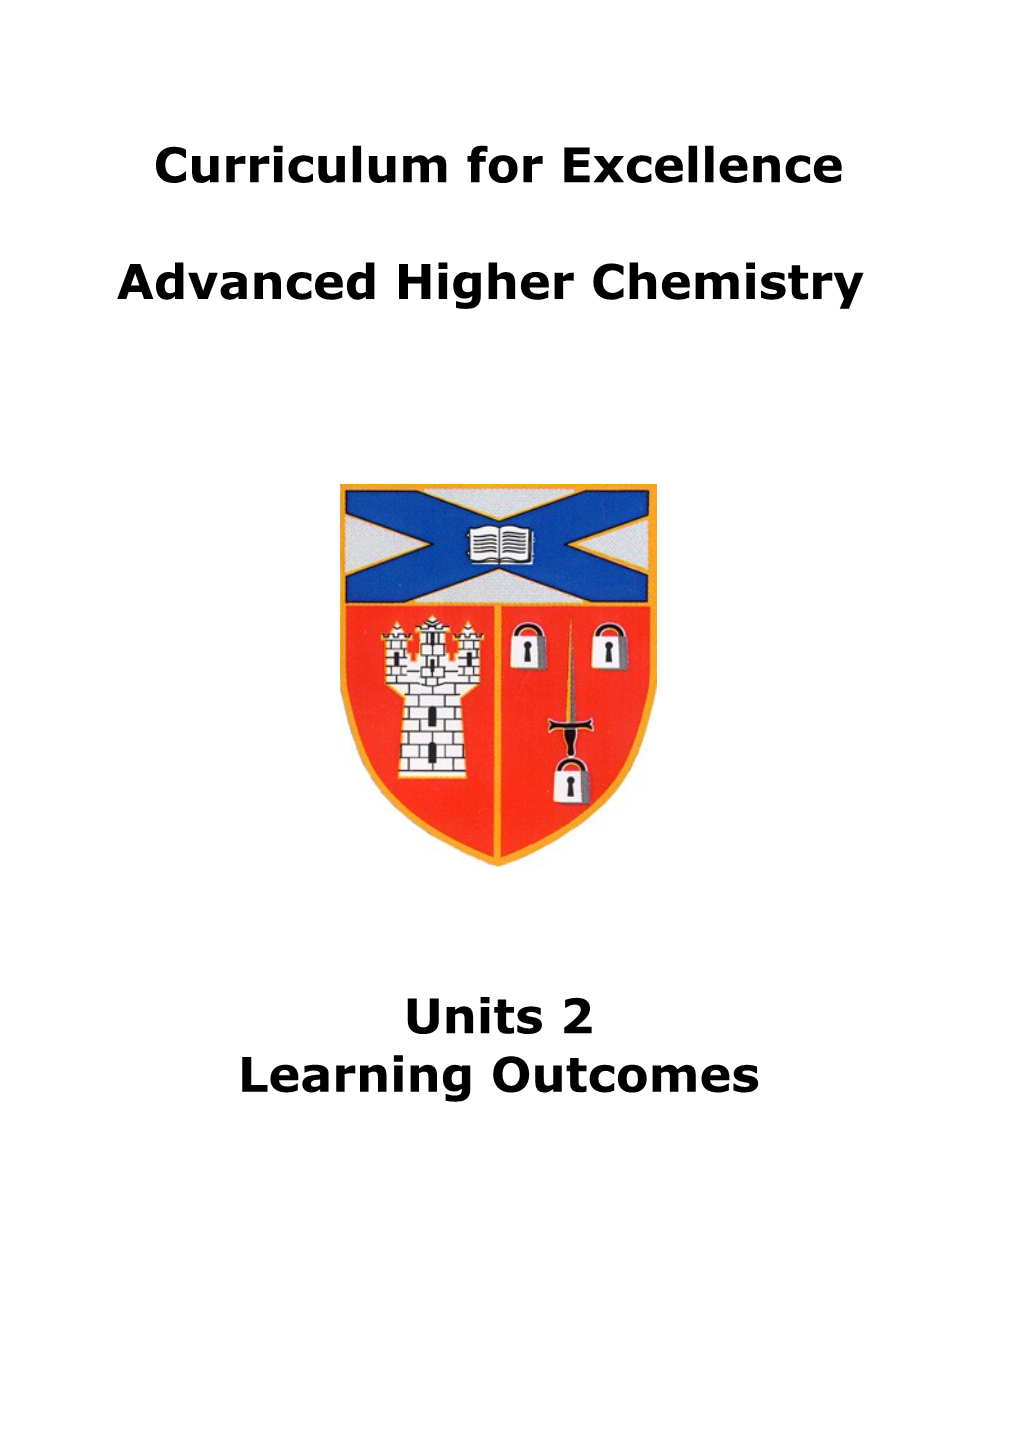 Advanced Higher Chemistry Student Learning Outcomes